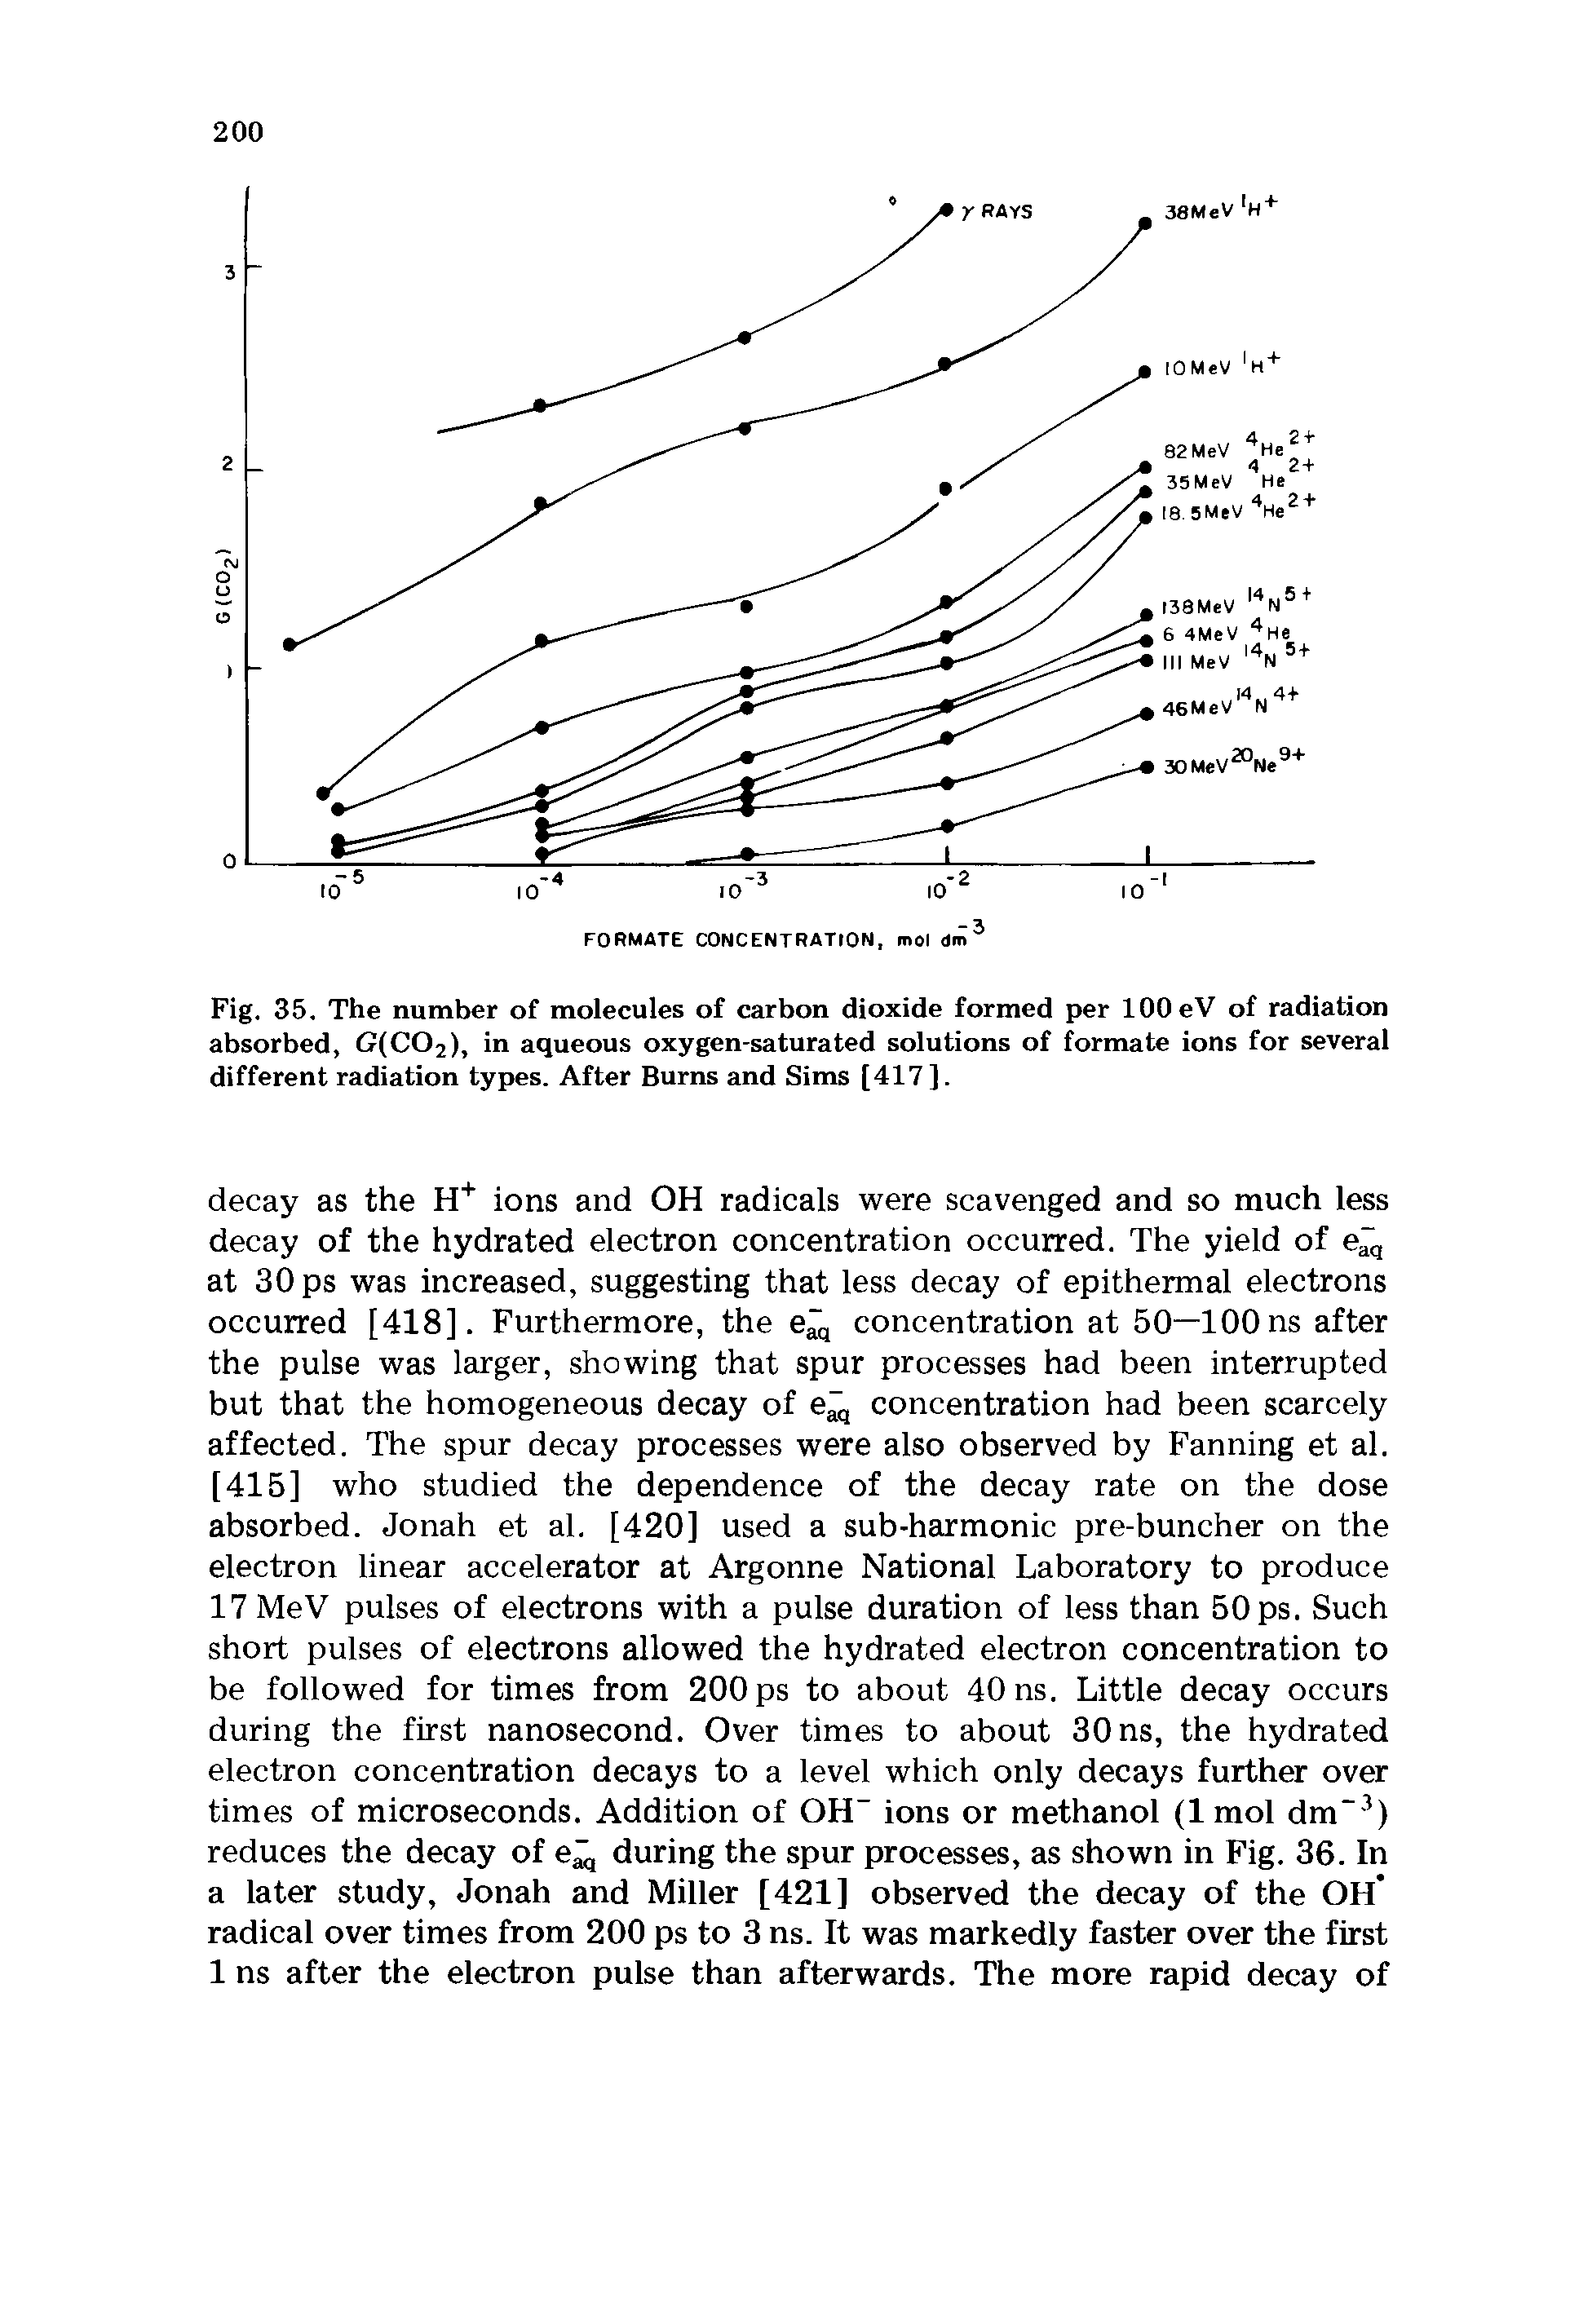 Fig. 35. The number of molecules of carbon dioxide formed per lOOeV of radiation absorbed, G(C02), in aqueous oxygen-saturated solutions of formate ions for several different radiation types. After Burns and Sims [417].